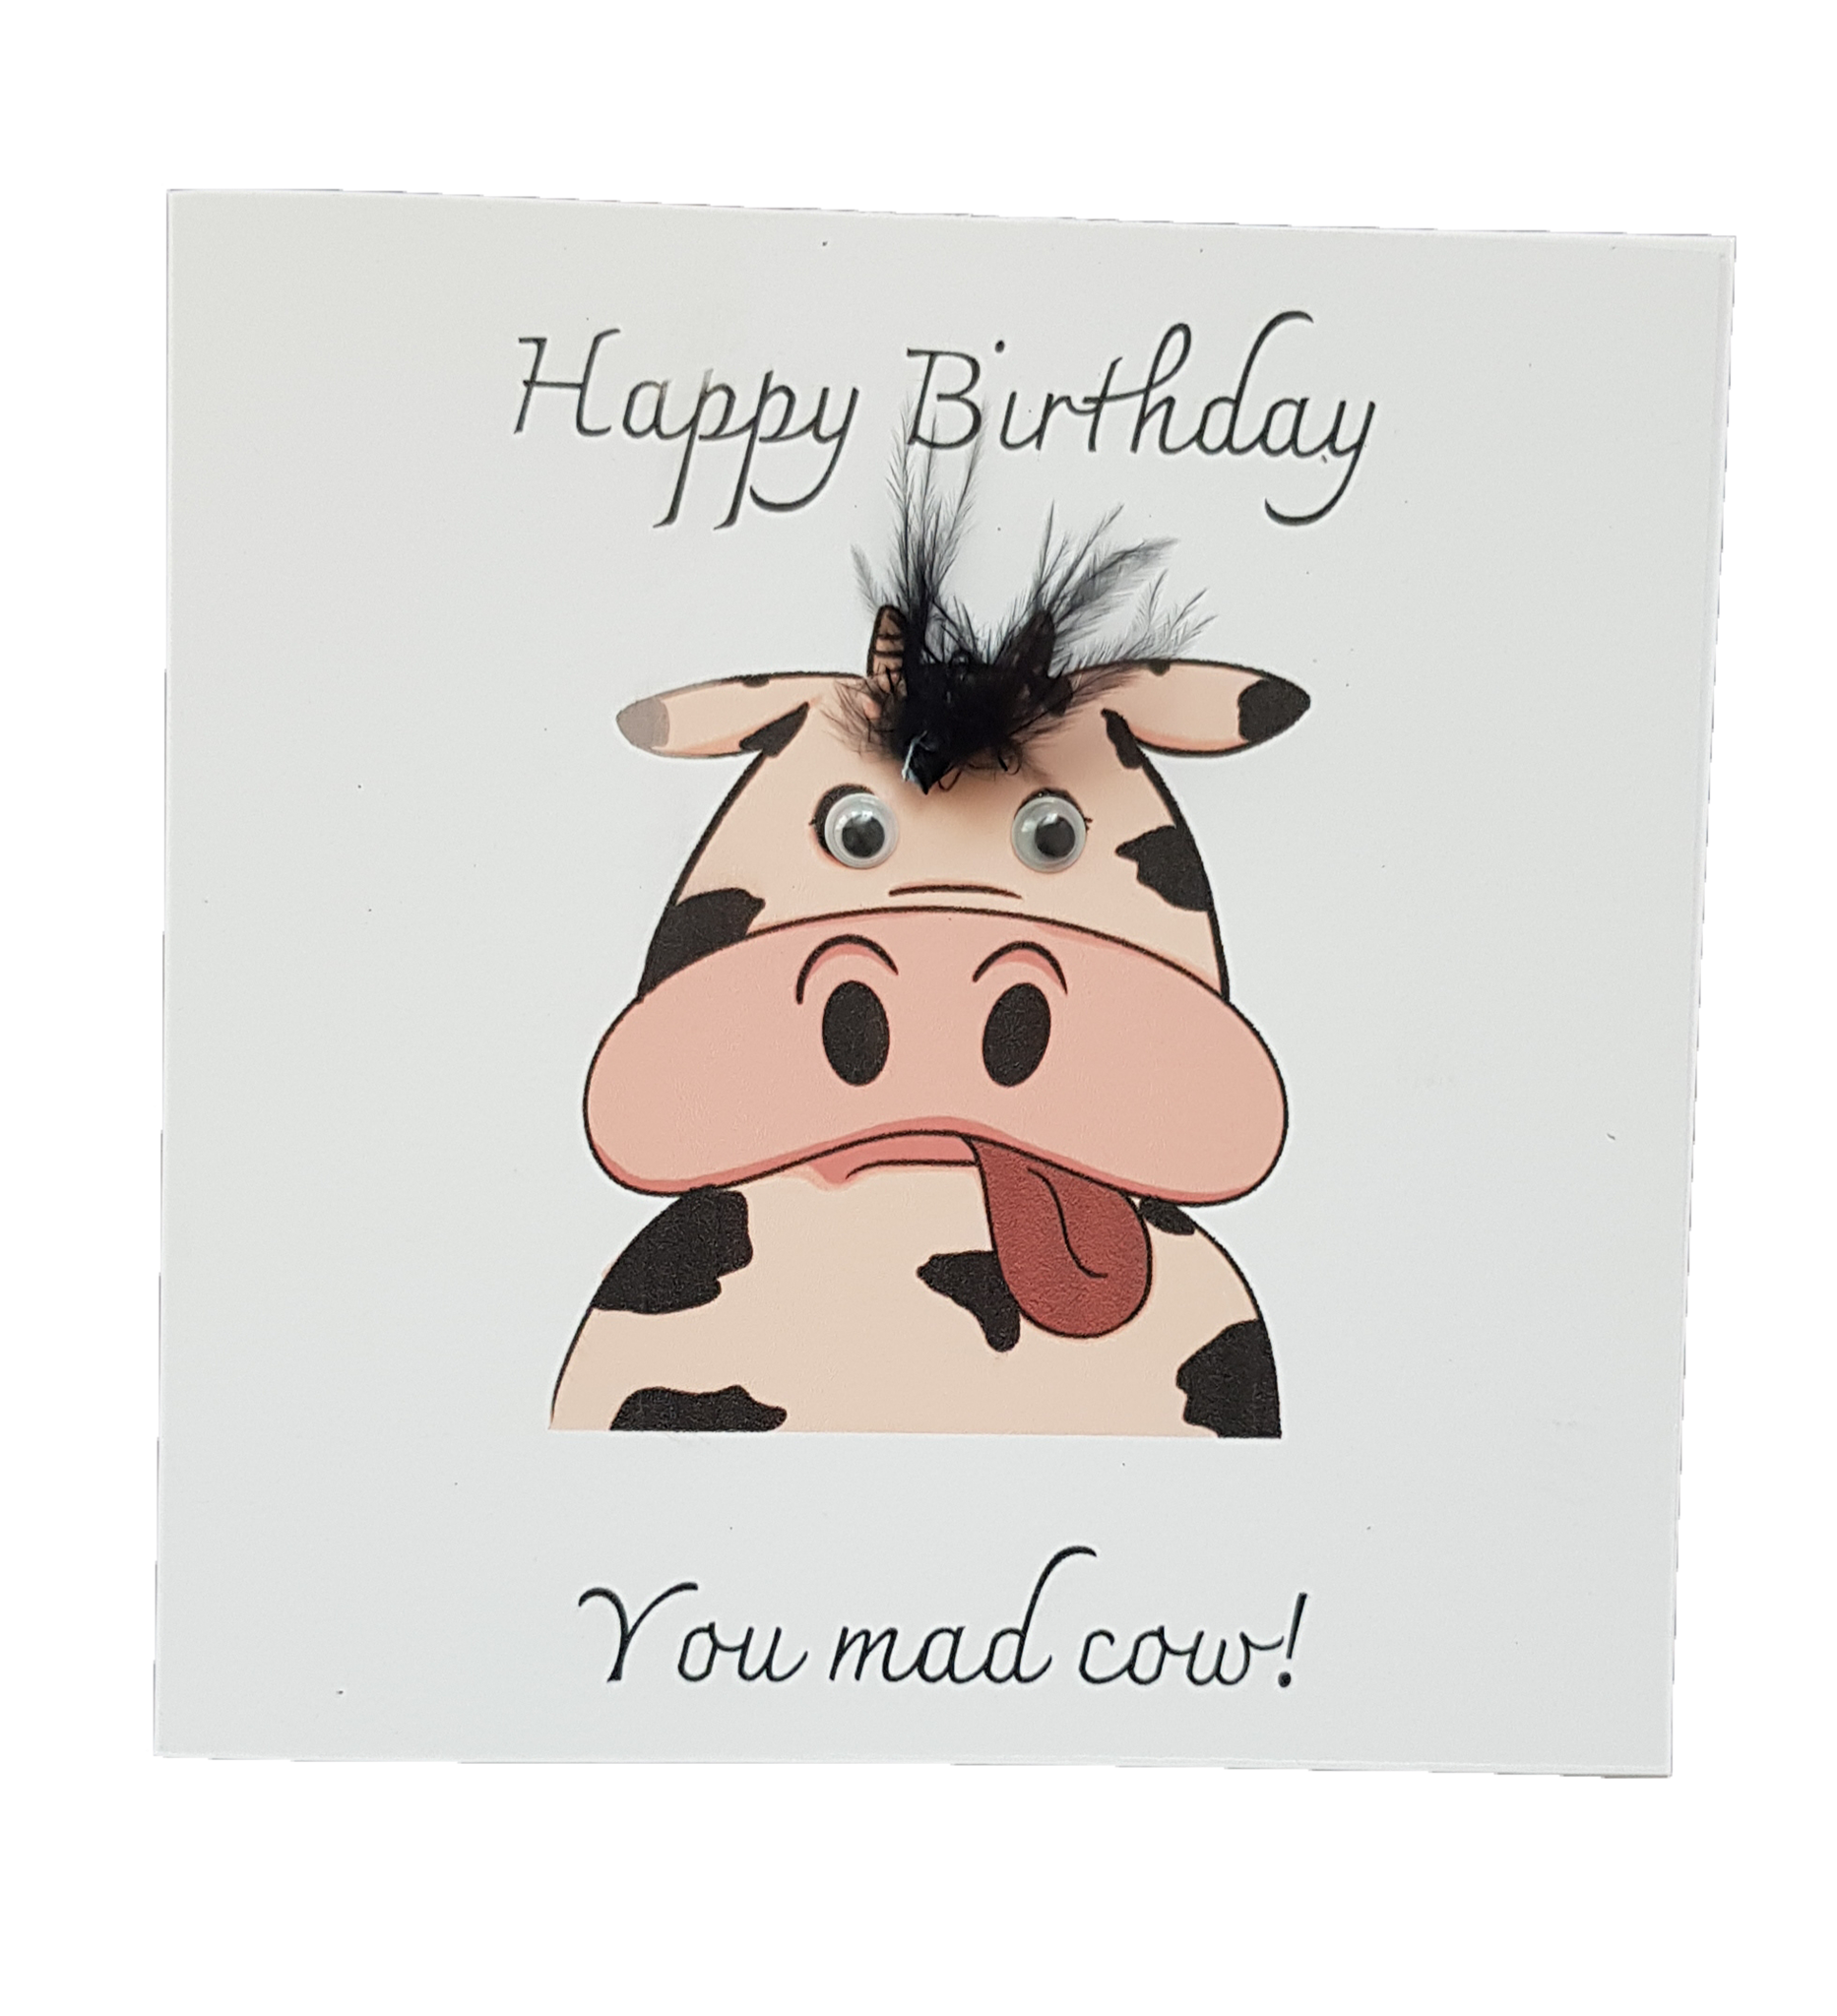 Silly Mad cow Birthday card with a fluffly fringe and googly eyes